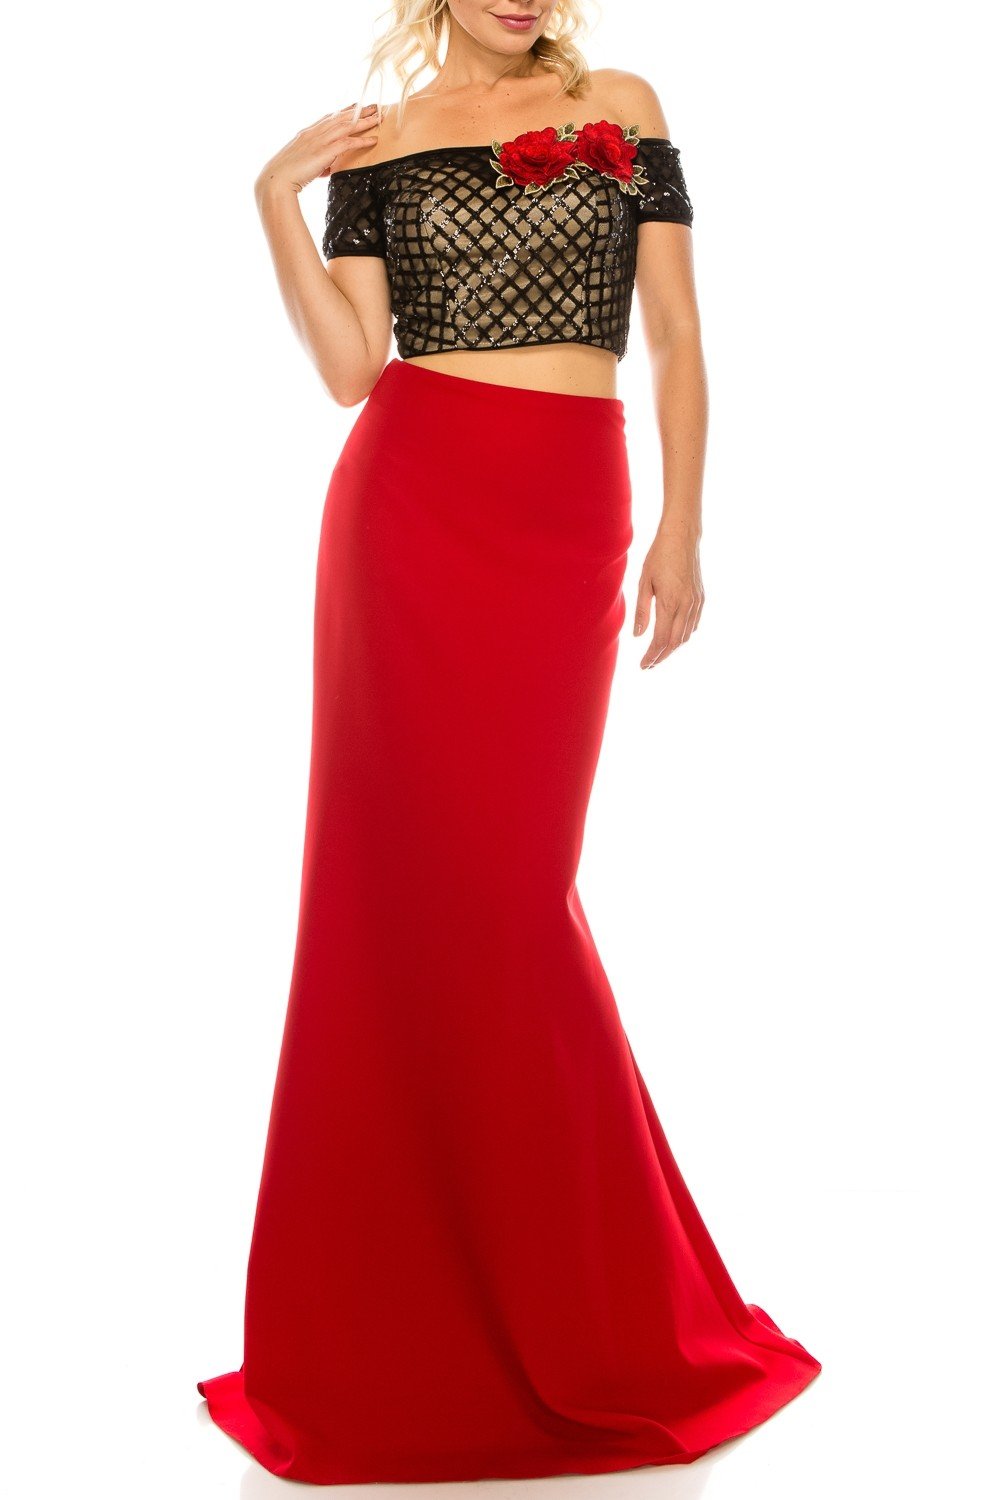 Odrella - 4599 Two Piece Sequined Off-Shoulder Evening Gown In Red